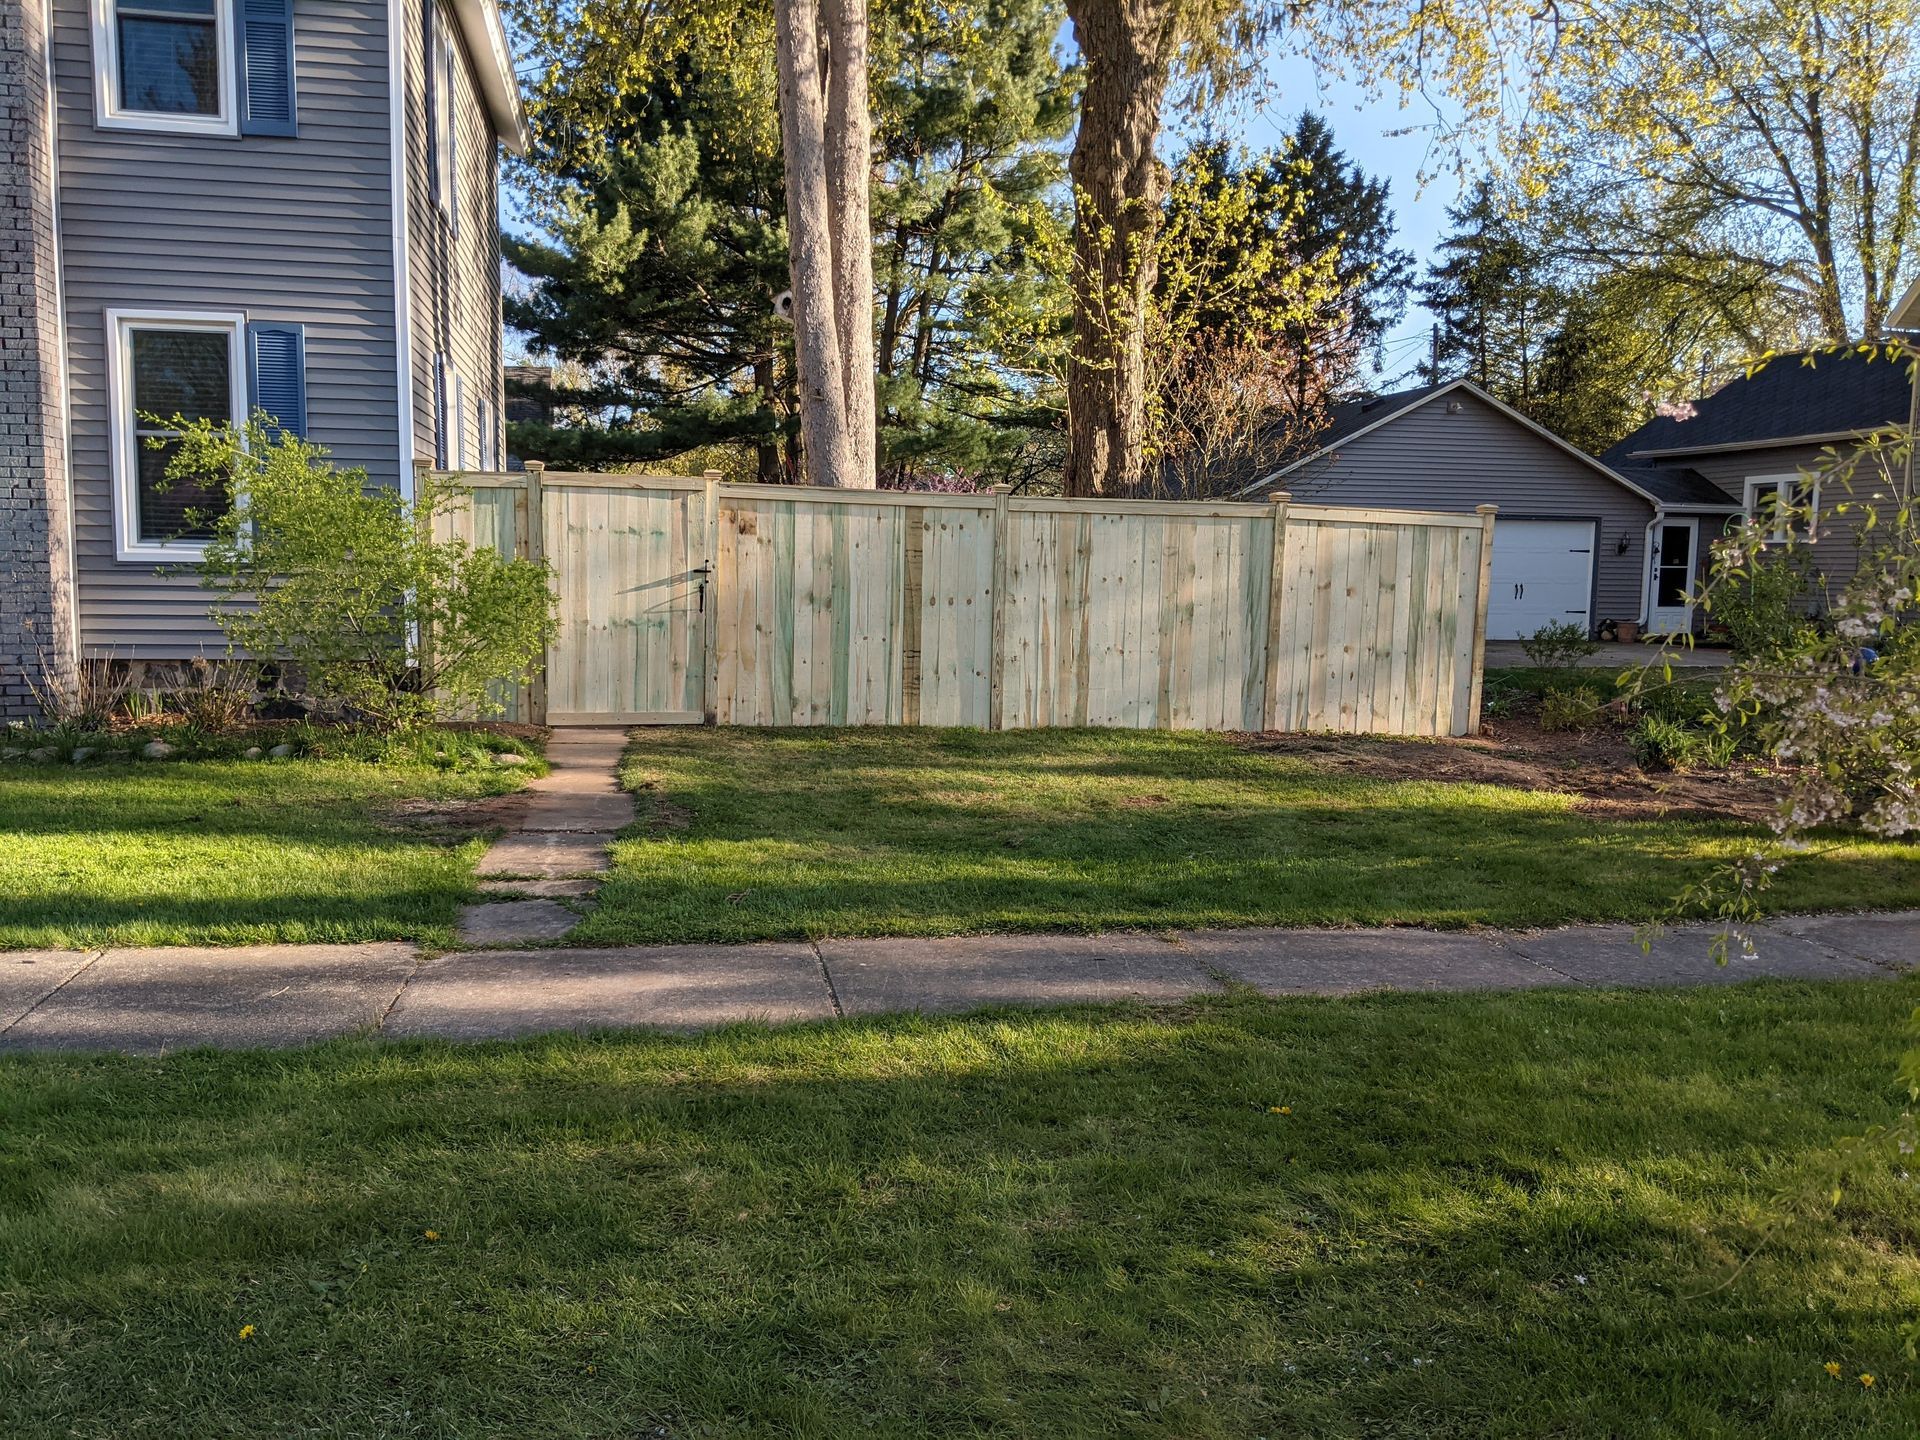 Rustic wooden fence, with weathered planks and visible grain patterns, enclosing a garden area.